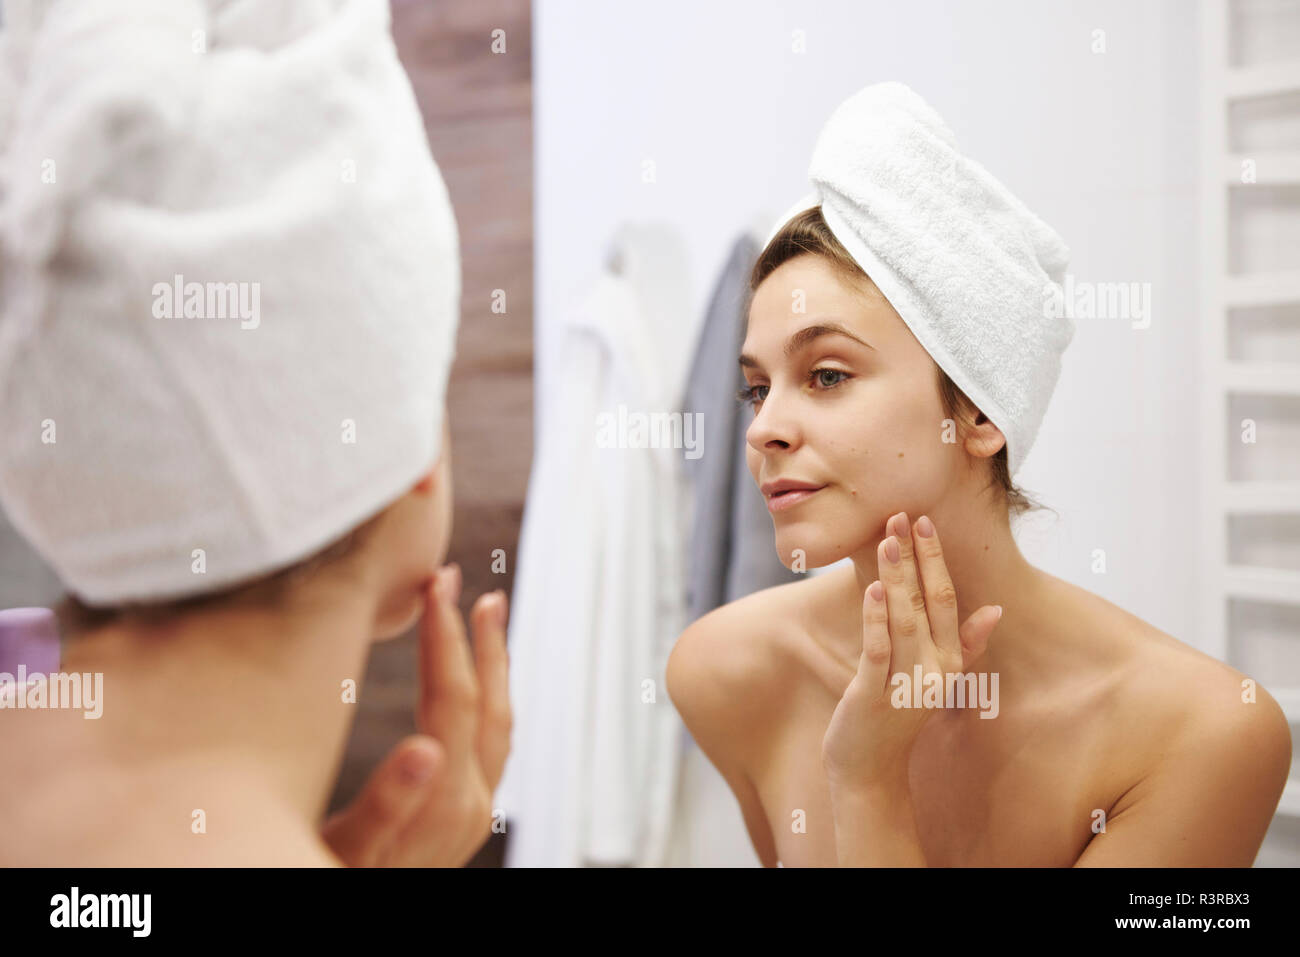 Mirror image of young woman examining her face in the bathroom Stock Photo